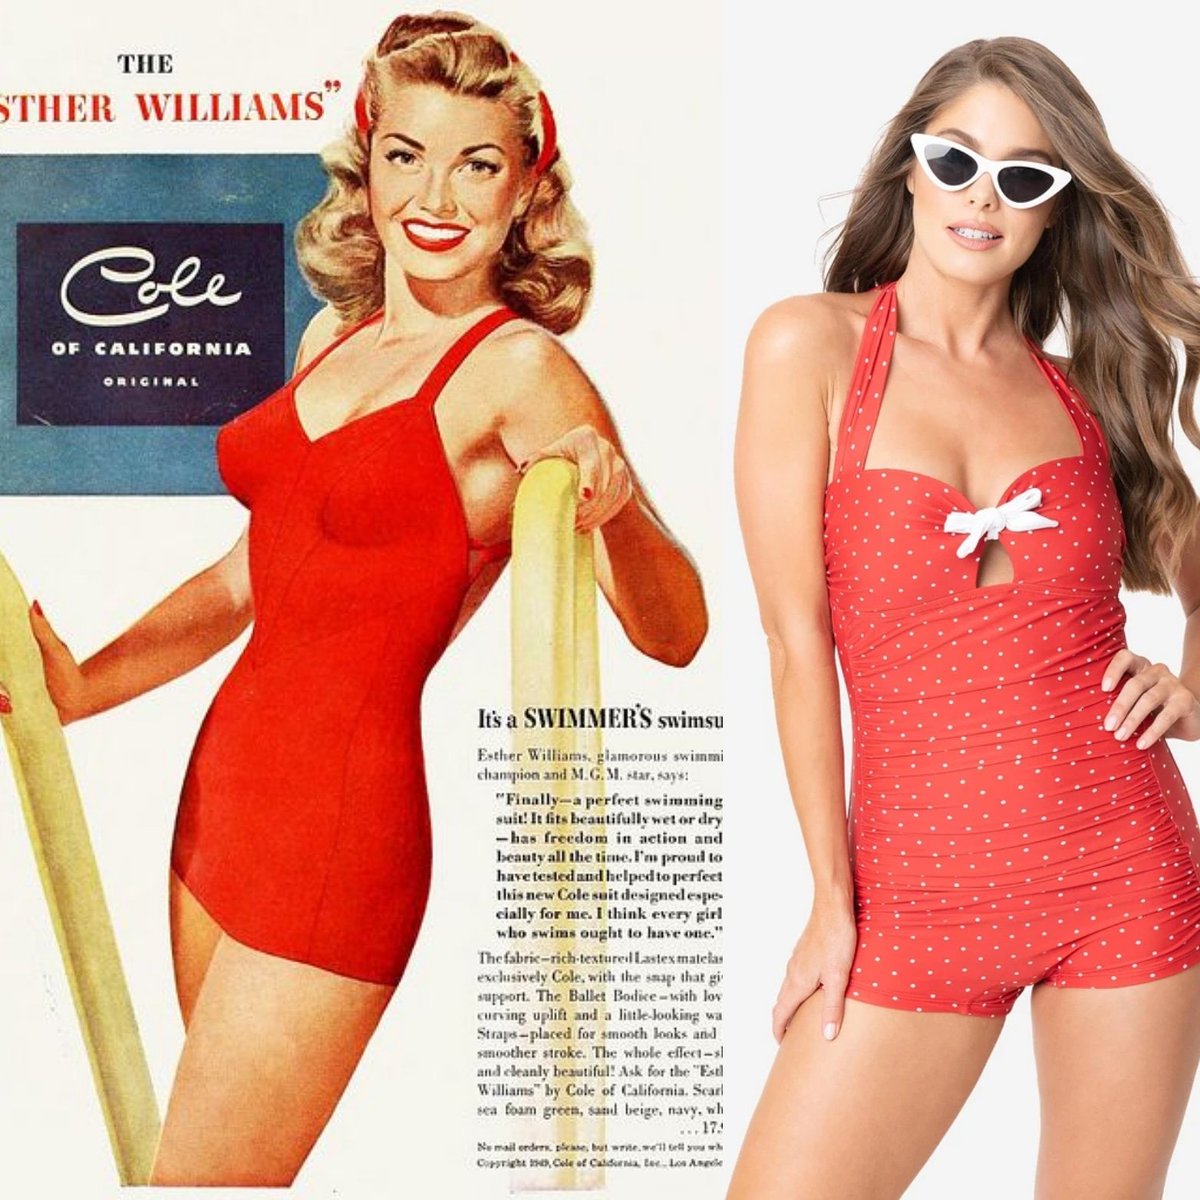 Our Vintage Style Bathing Suits are still 30% OFF at Retro Betty! 🏊‍♀️ We're OPEN Mondays 10am-6pm to stop in #RetroBettySLC Suits Available sizes XS-3X ☀️
#vintagestyle 
#vintagebathingsuit